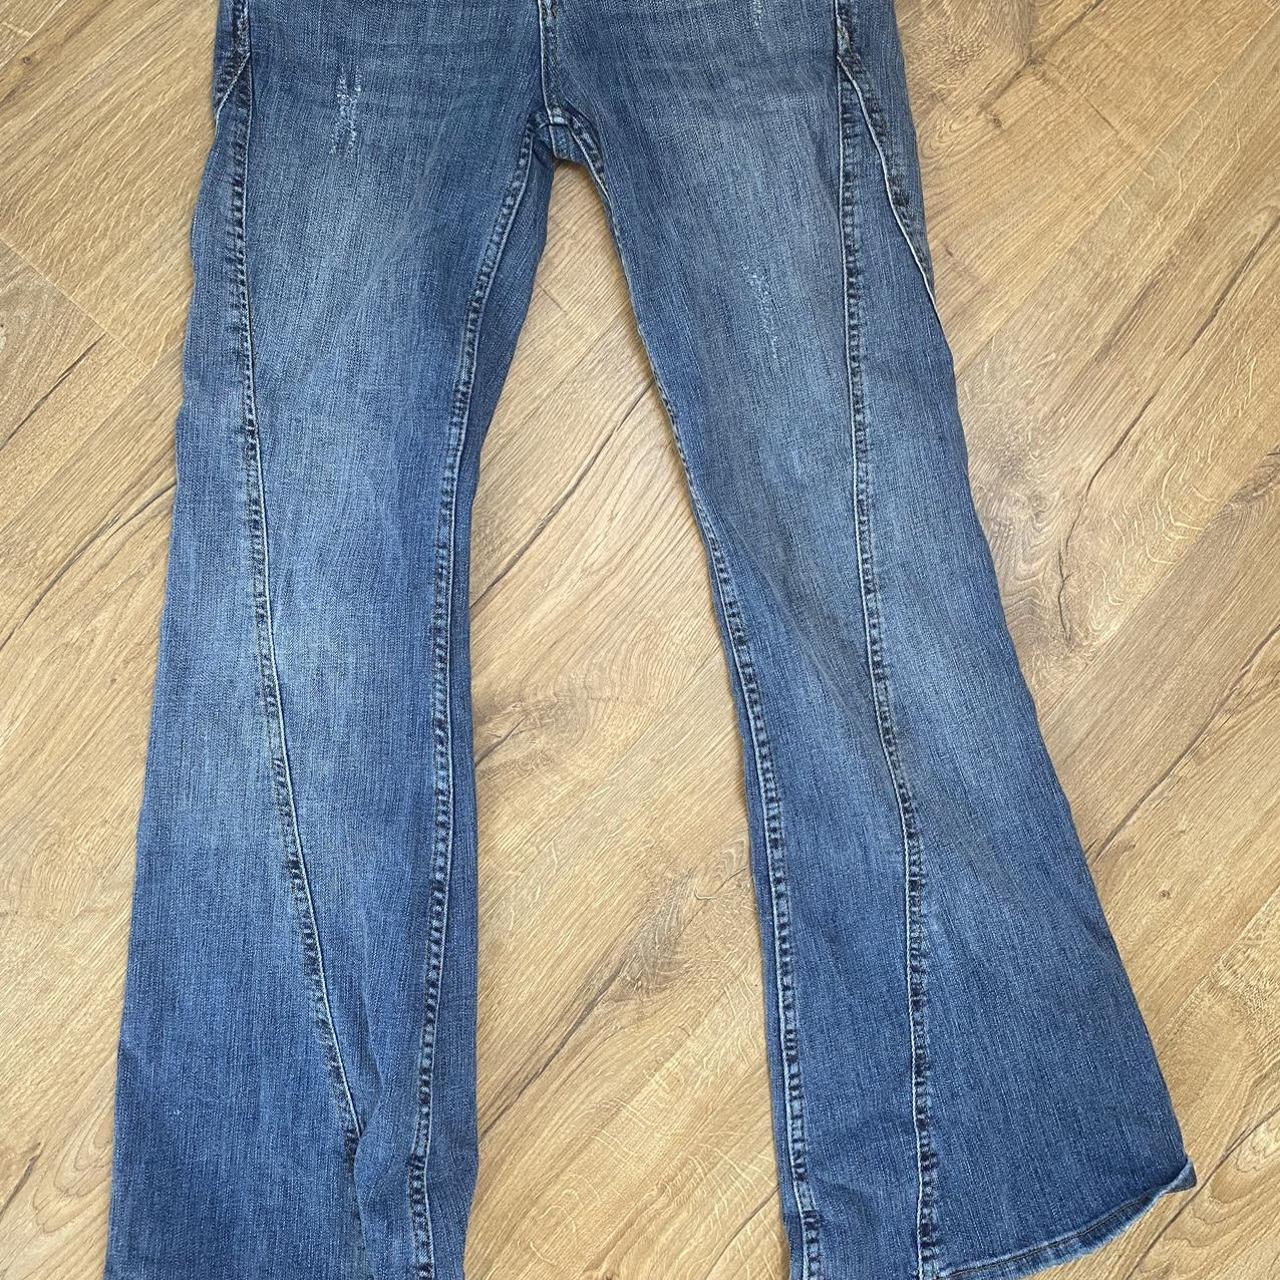 Urban Outfitters Low Rise Flare Jeans Waist... - Depop